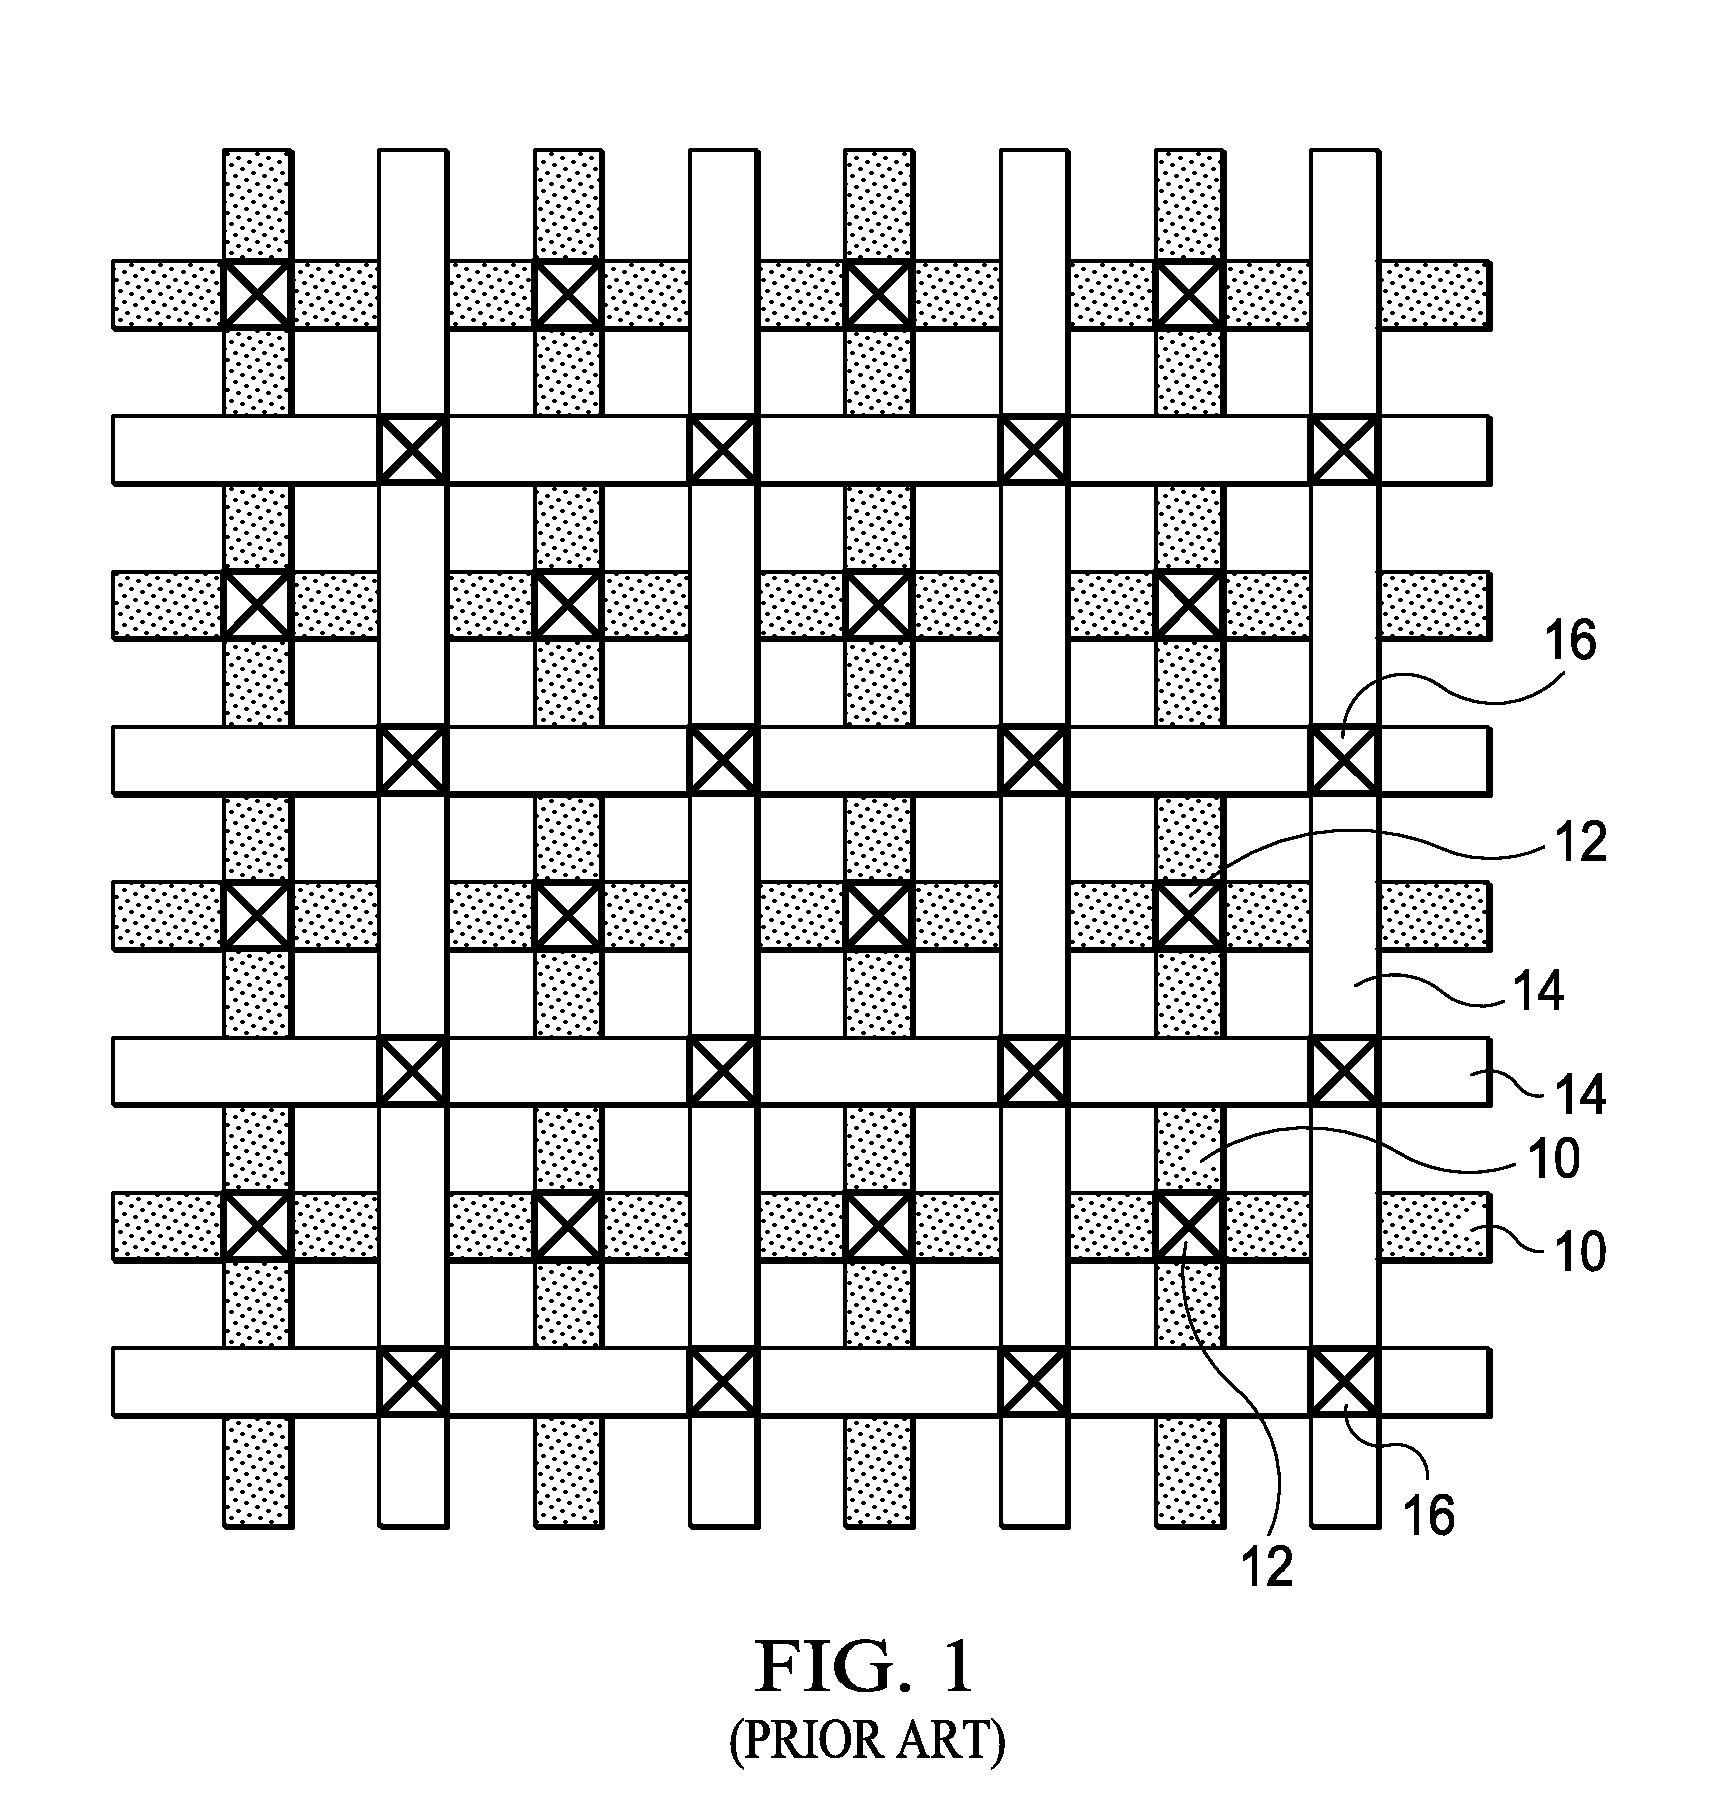 Supplying Power to Integrated Circuits Using a Grid Matrix Formed of Through-Silicon Vias